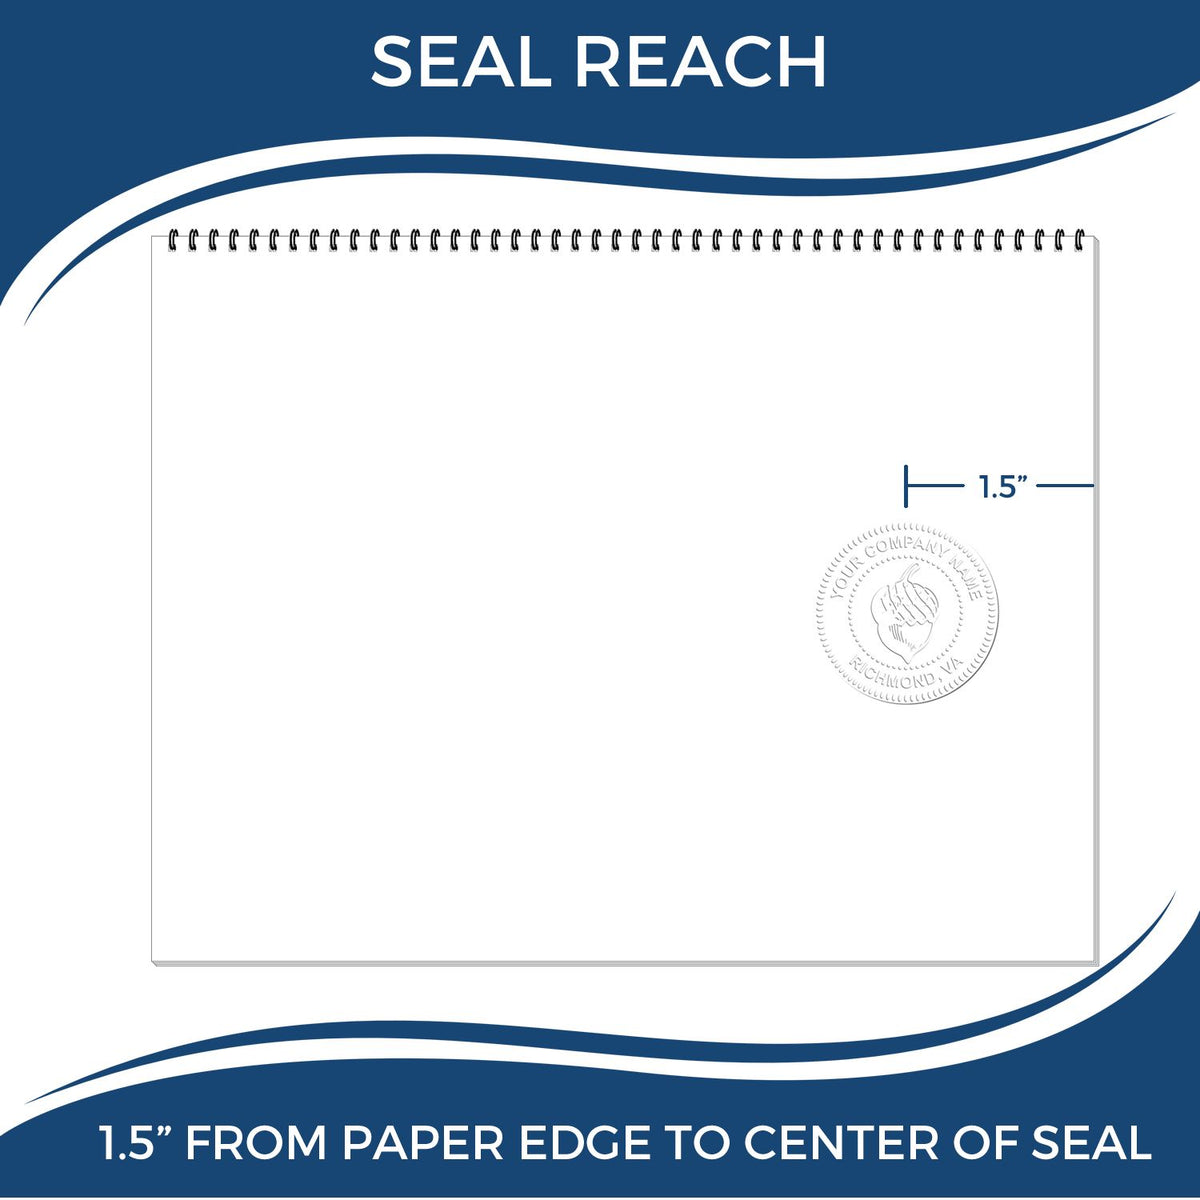 An infographic showing the seal reach which is represented by a ruler and a miniature seal image of the Iowa Desk Architect Embossing Seal